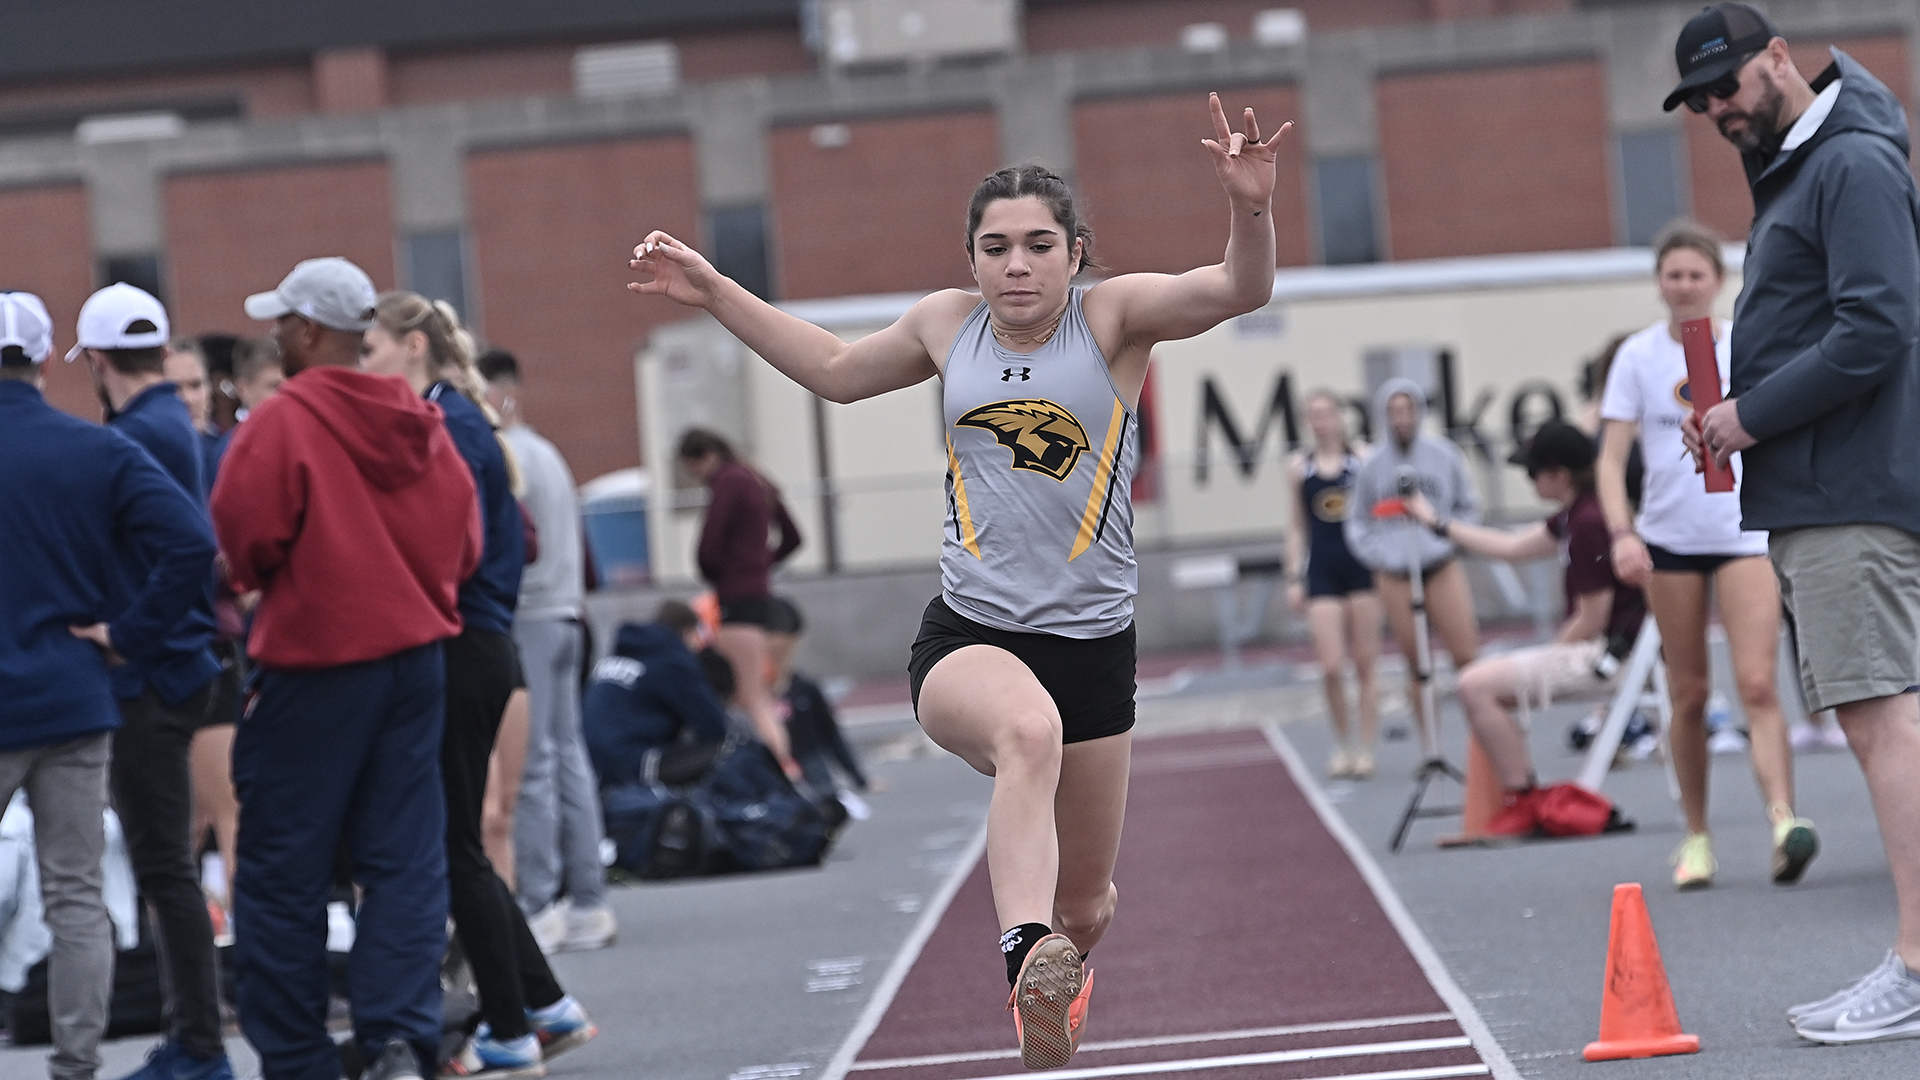 Karina Perez competed in the triple jump for the Titans at the UW-La Crosse Phil Esten Challenge.